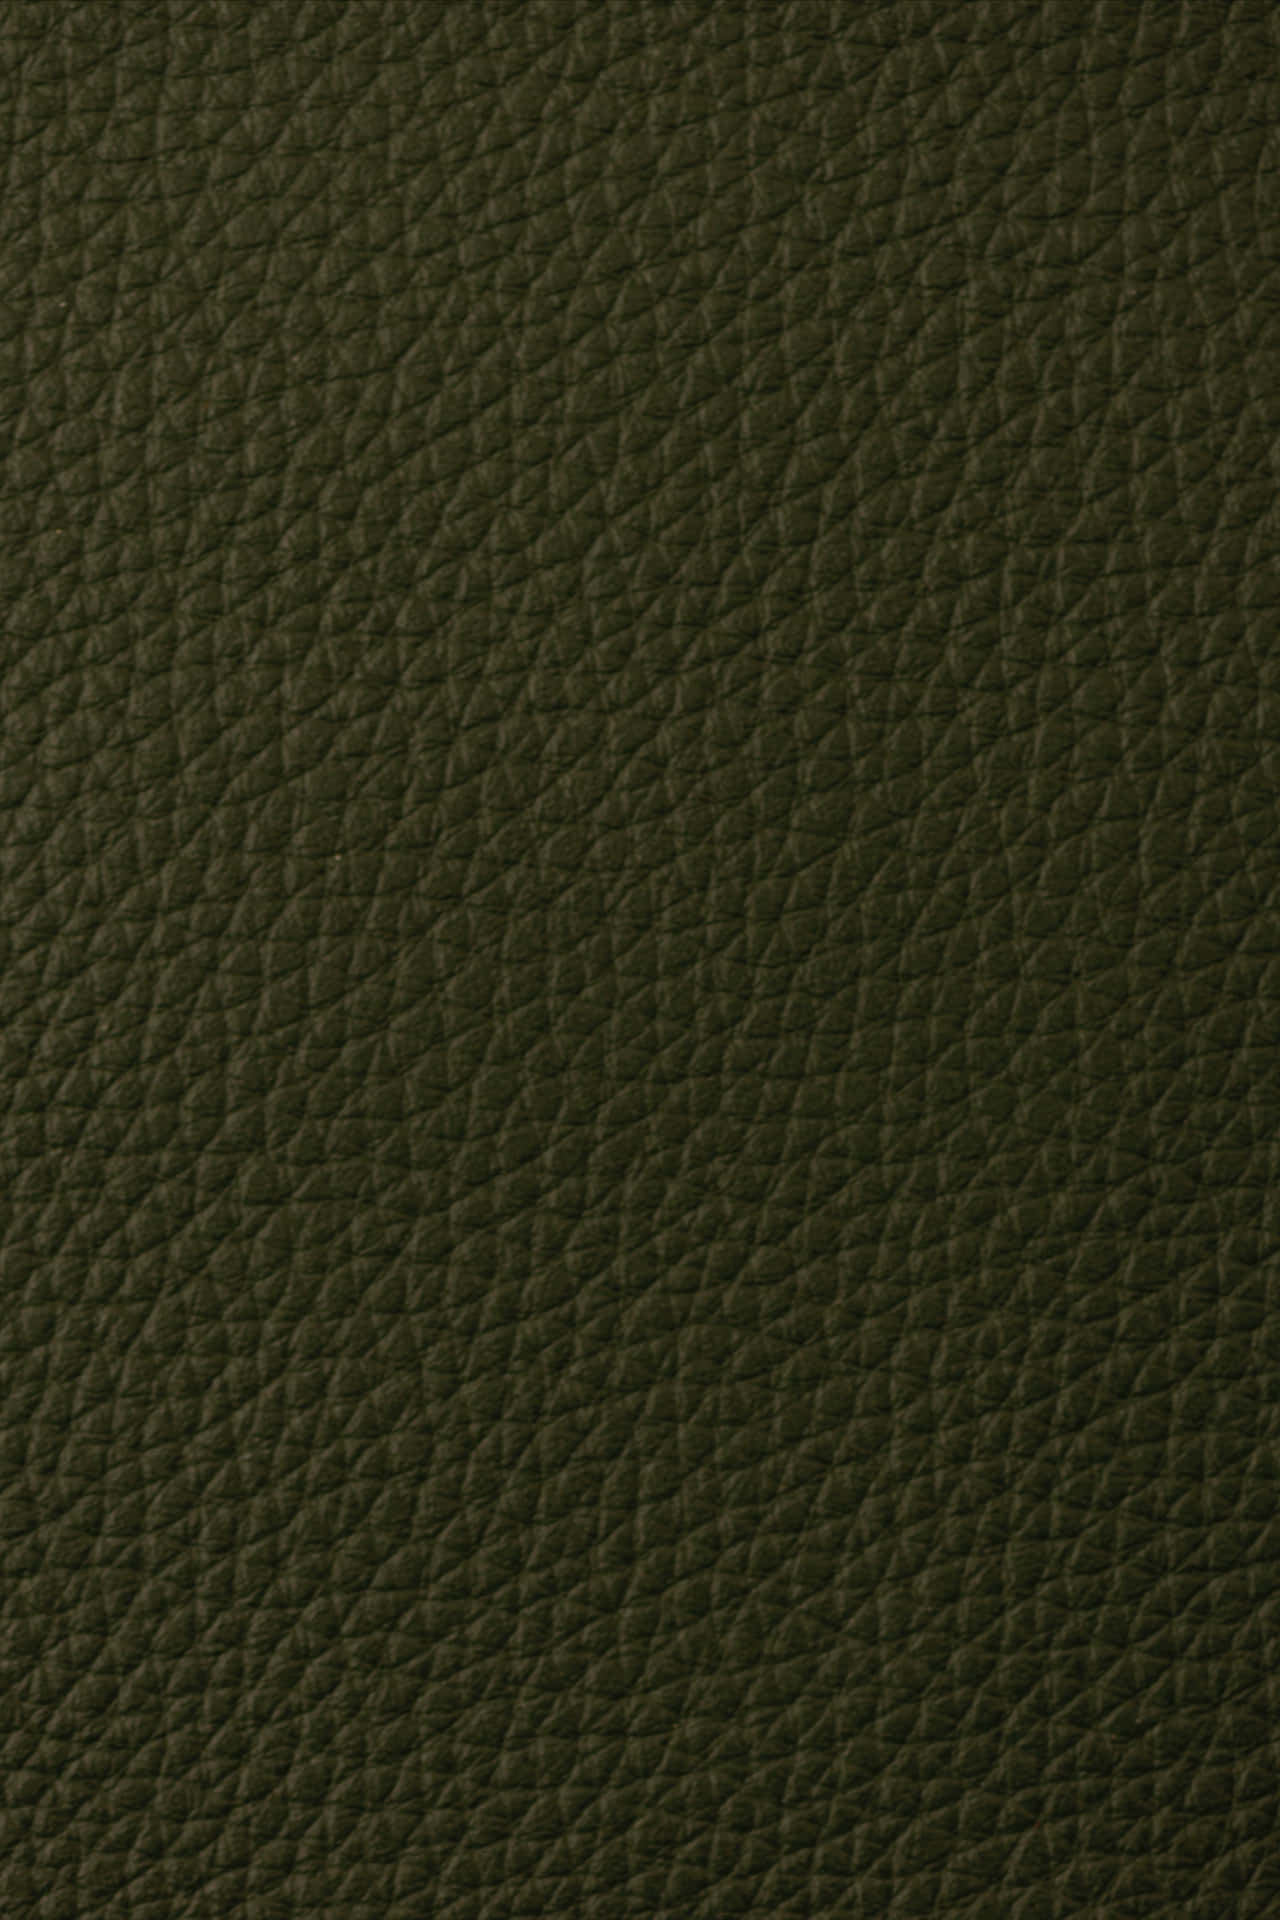 Dark Green Leather Texture Picture